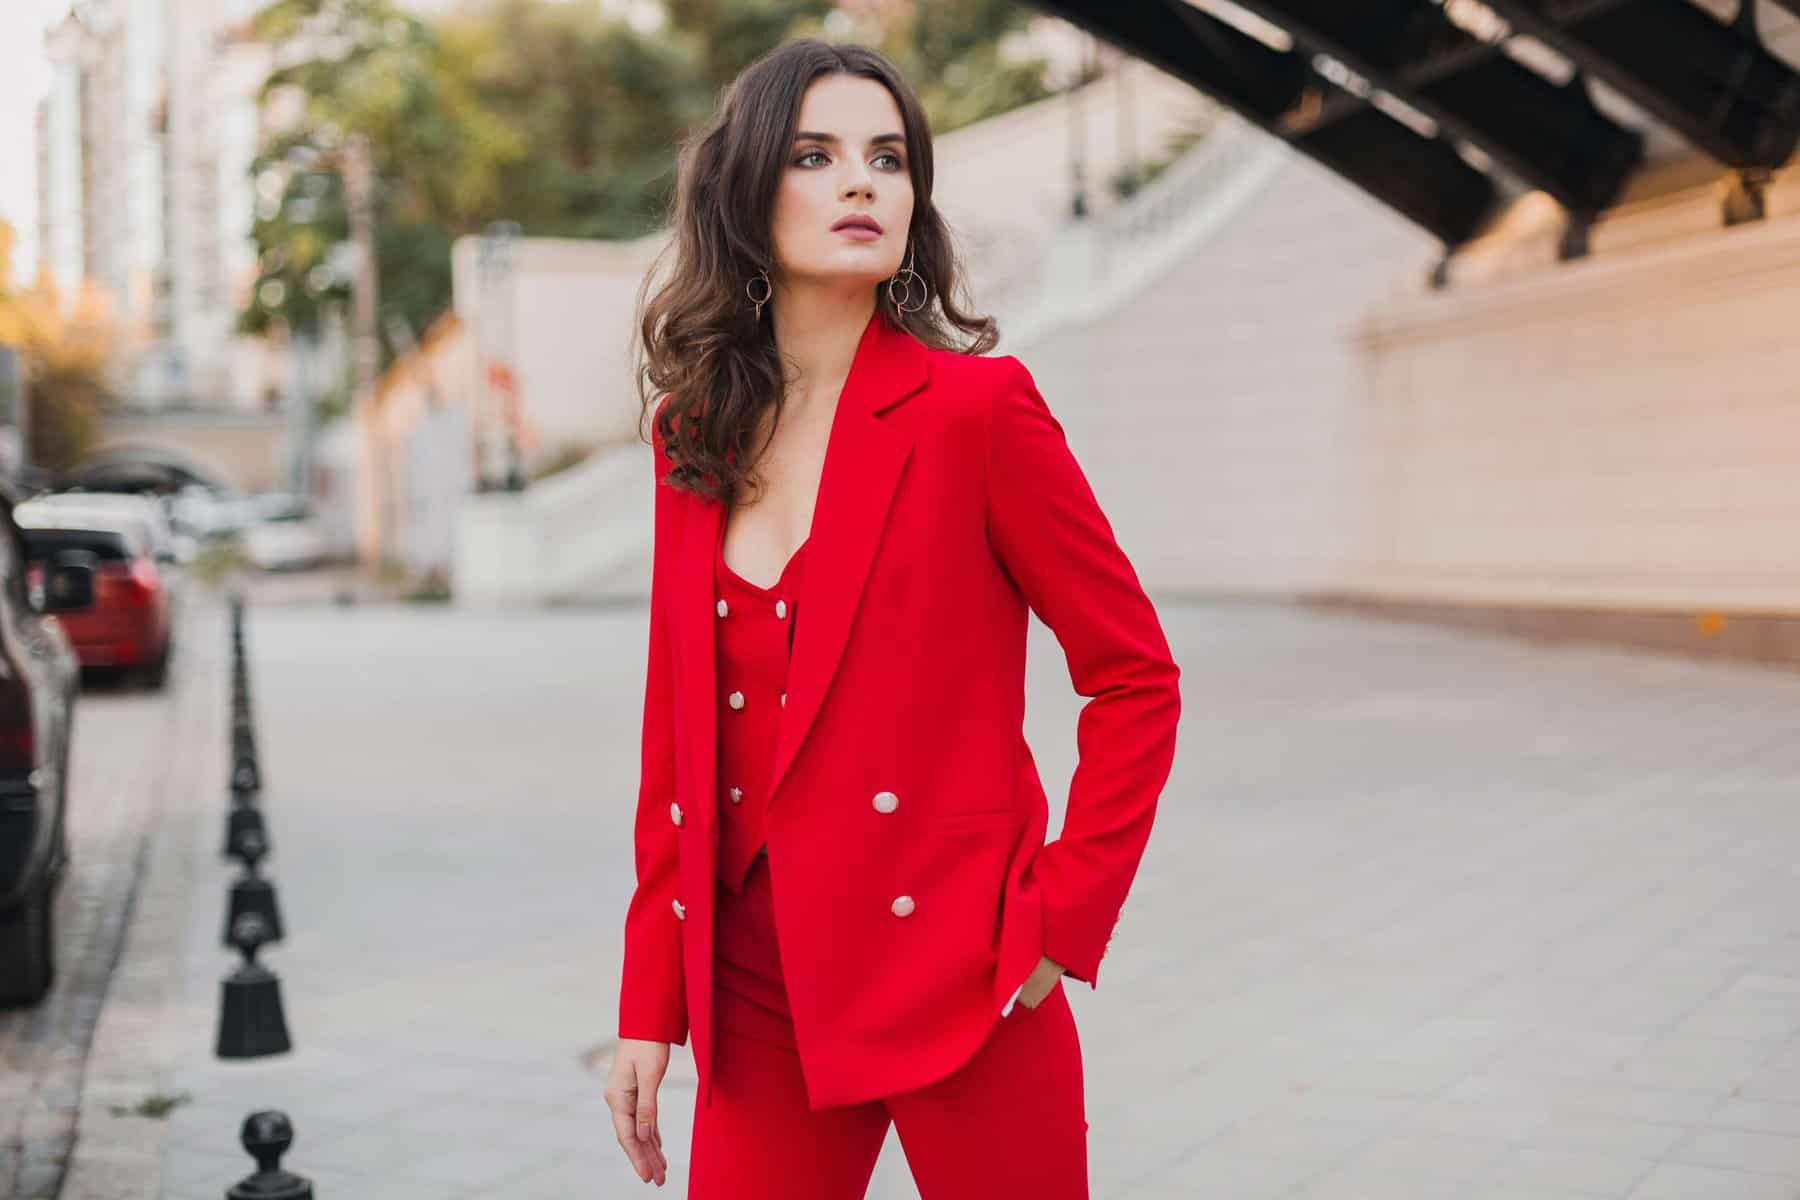 Wedding Bells Why Red Suits are the New Trend